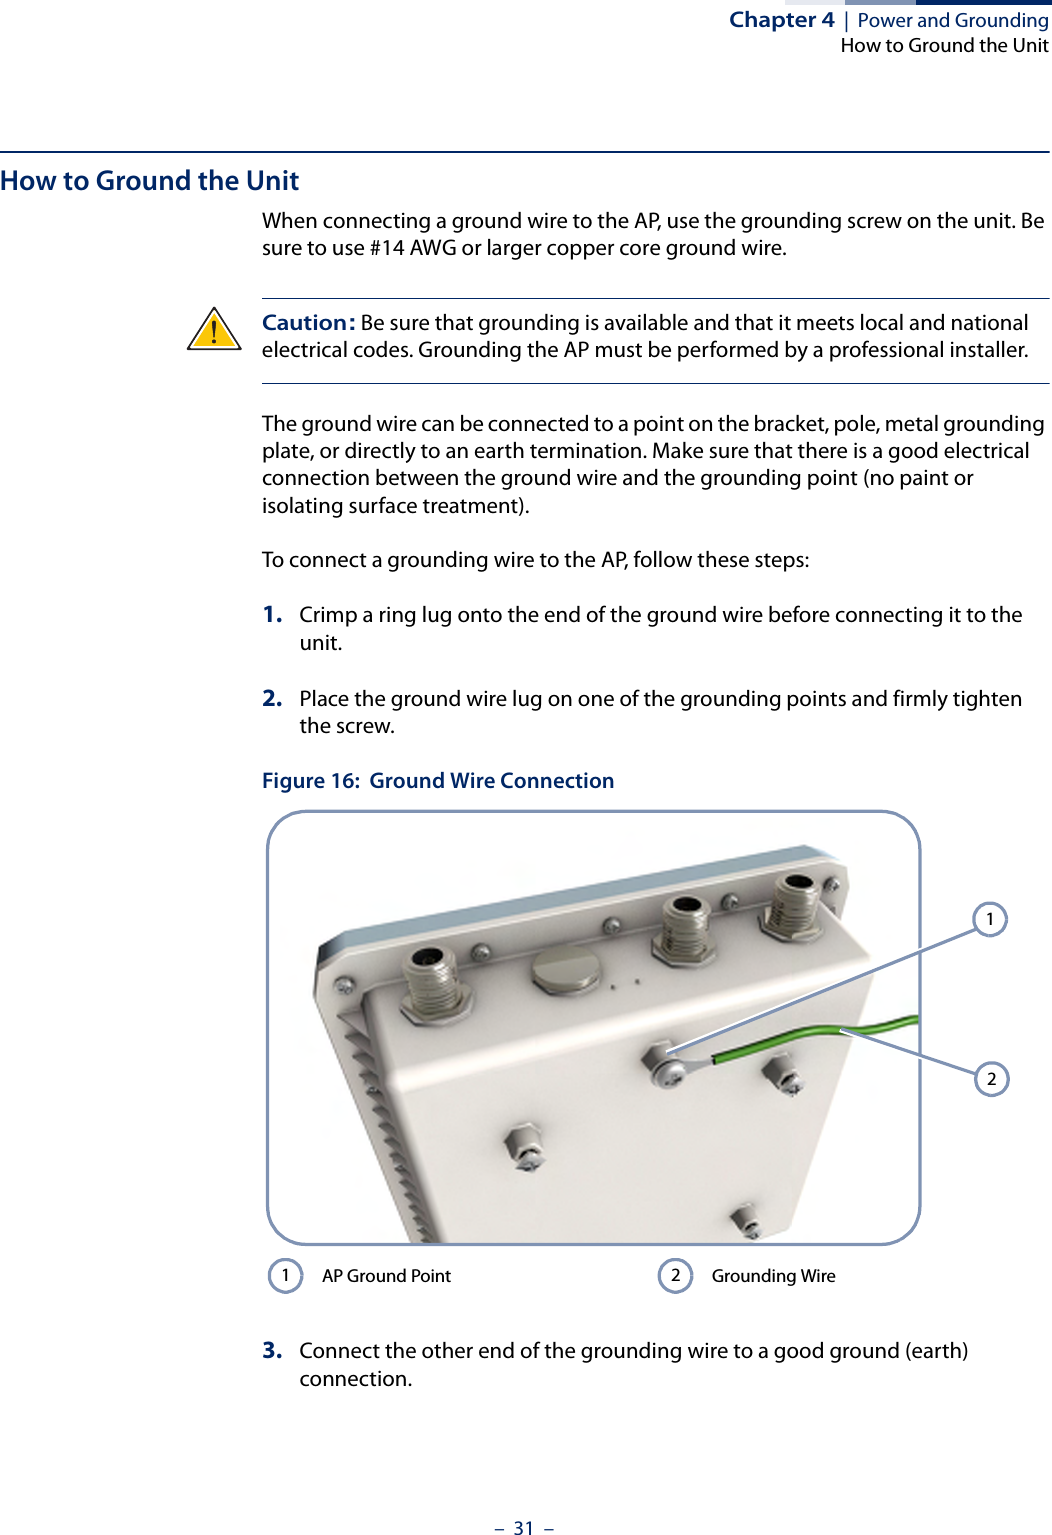 Chapter 4  |  Power and GroundingHow to Ground the Unit–  31  –How to Ground the UnitWhen connecting a ground wire to the AP, use the grounding screw on the unit. Be sure to use #14 AWG or larger copper core ground wire.Caution: Be sure that grounding is available and that it meets local and national electrical codes. Grounding the AP must be performed by a professional installer.The ground wire can be connected to a point on the bracket, pole, metal grounding plate, or directly to an earth termination. Make sure that there is a good electrical connection between the ground wire and the grounding point (no paint or isolating surface treatment).To connect a grounding wire to the AP, follow these steps:1. Crimp a ring lug onto the end of the ground wire before connecting it to the unit.2. Place the ground wire lug on one of the grounding points and firmly tighten the screw.Figure 16:  Ground Wire Connection3. Connect the other end of the grounding wire to a good ground (earth) connection.AP Ground Point Grounding Wire1212